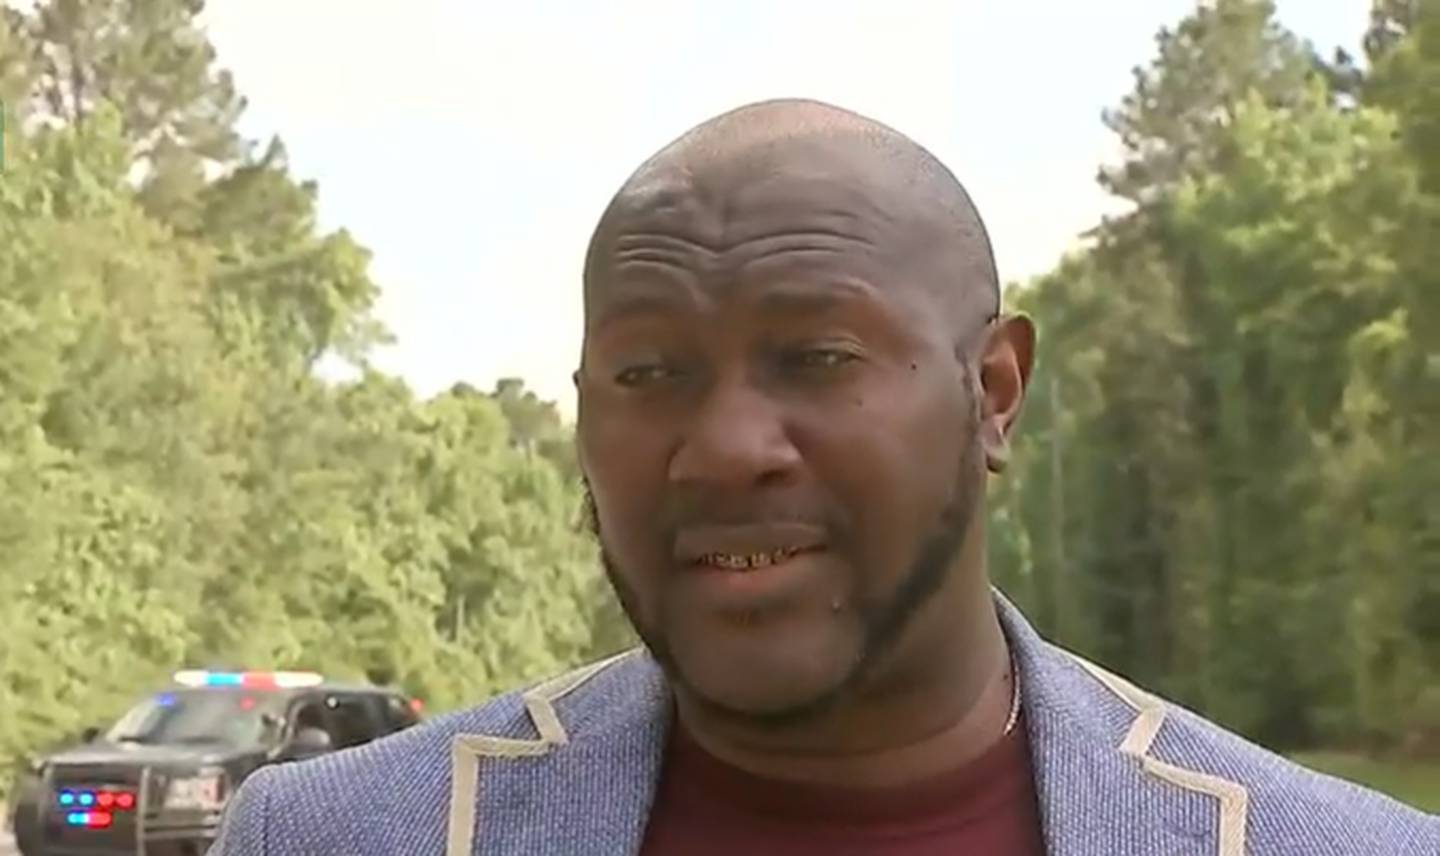 Action News Jax spoke to Pastor Mack Devon Knight in May, when he spoke about the investigation into an officer-involved shooting in Woodbine, in which his cousin was injured.